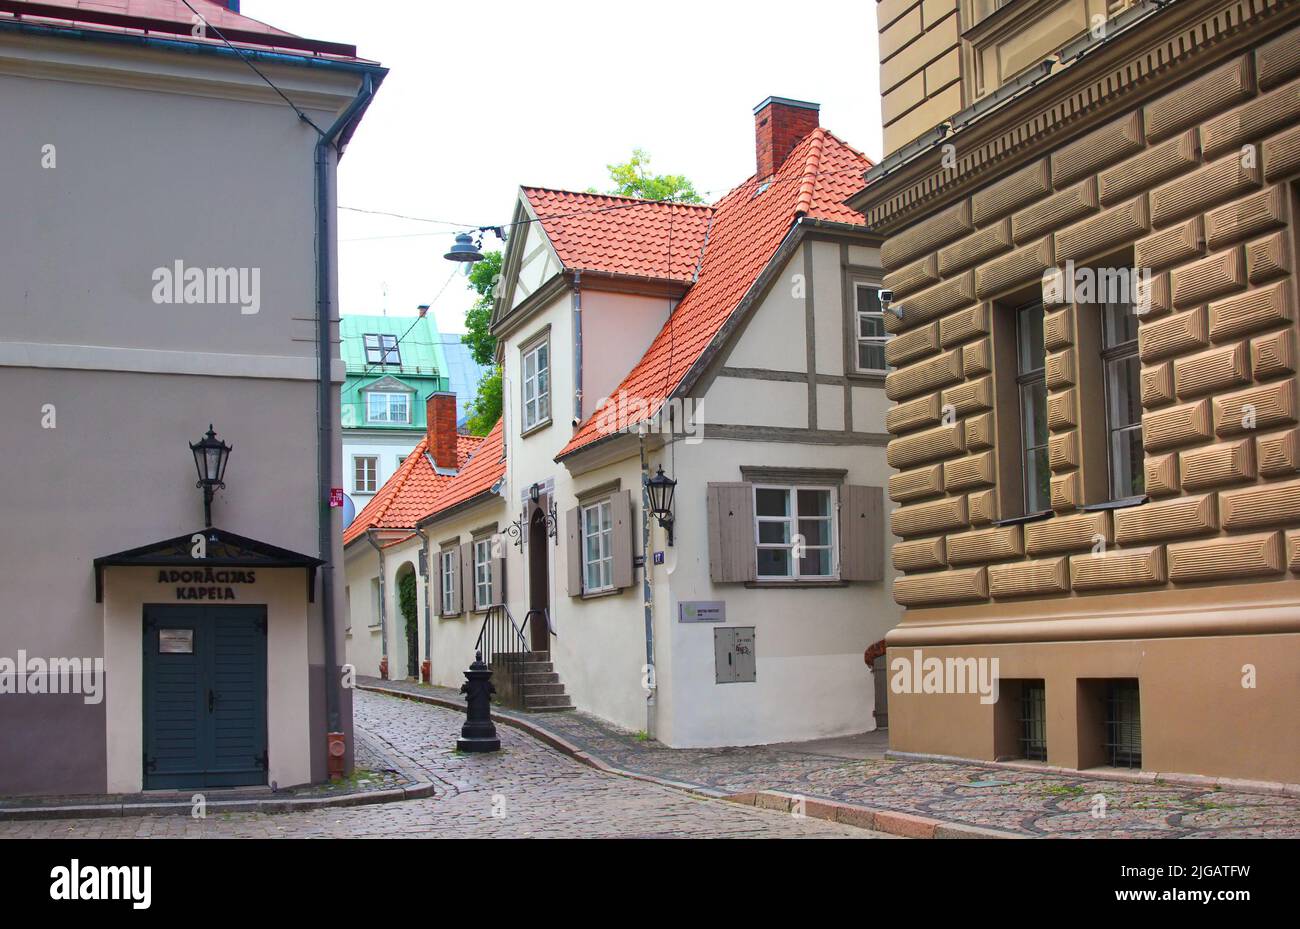 Riga, Latvia - September 10, 2013: Klostera street, a small cozy street with a cobbled pavement in the historical center of the city. Stock Photo